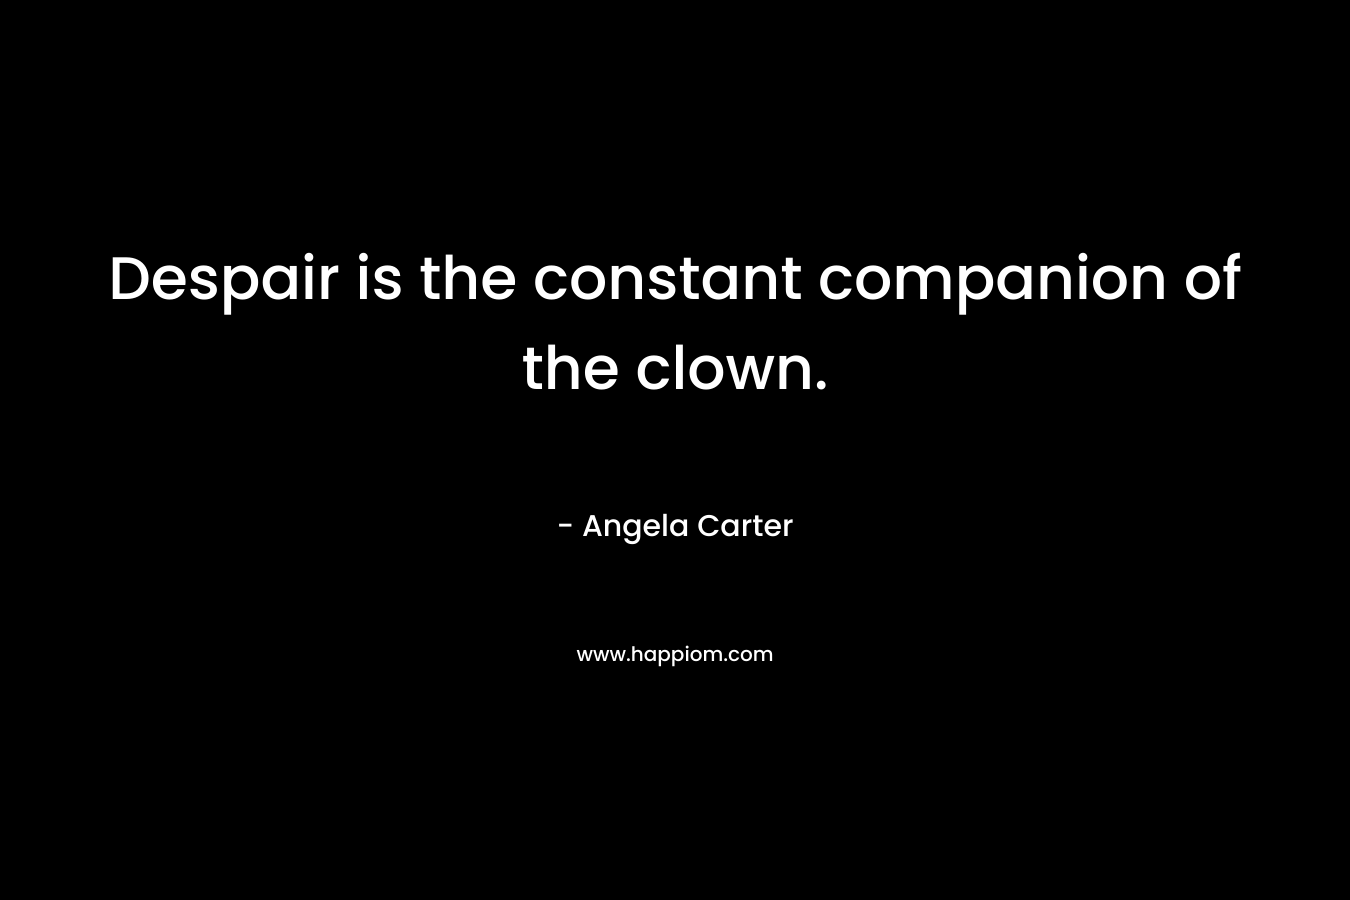 Despair is the constant companion of the clown. – Angela Carter